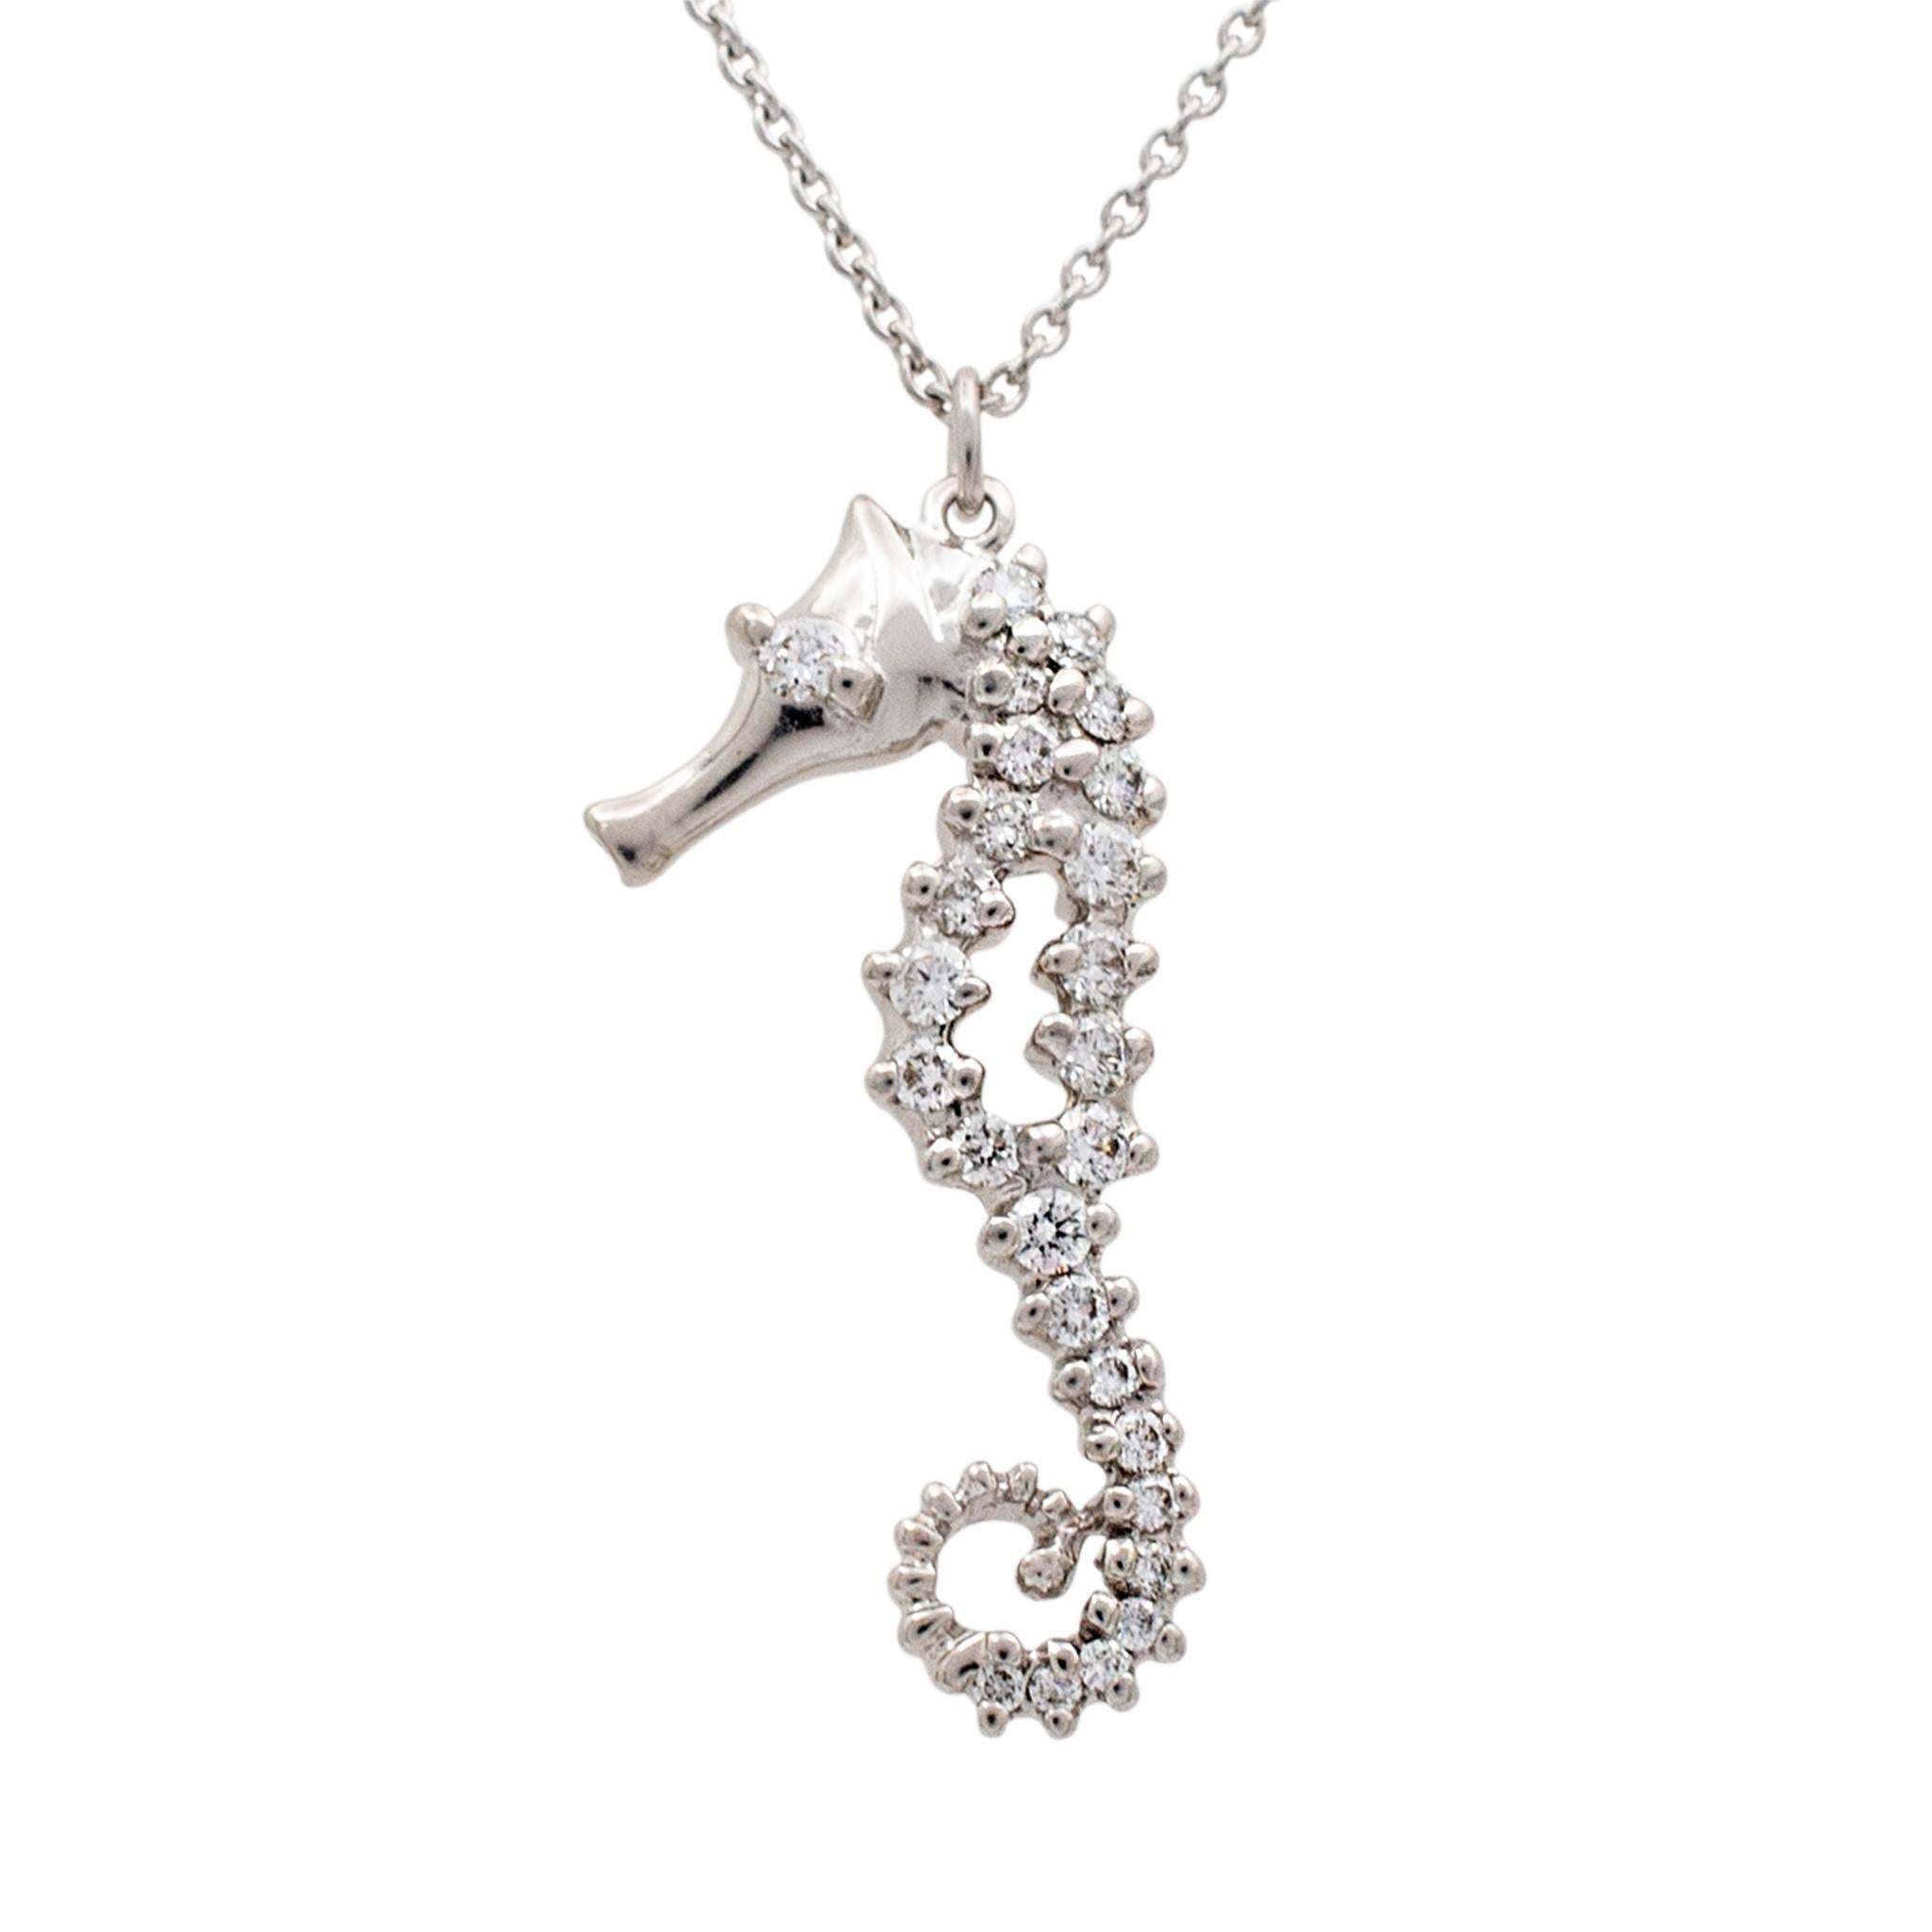 Gender: Ladies

Metal Type: 18K White Gold

Length: 16.00 inches

Pendant Mesurements: 35.00mm x 10.50mm

Weight: 3.54 grams

18K white gold single strand collar diamond necklace. Engraved with 